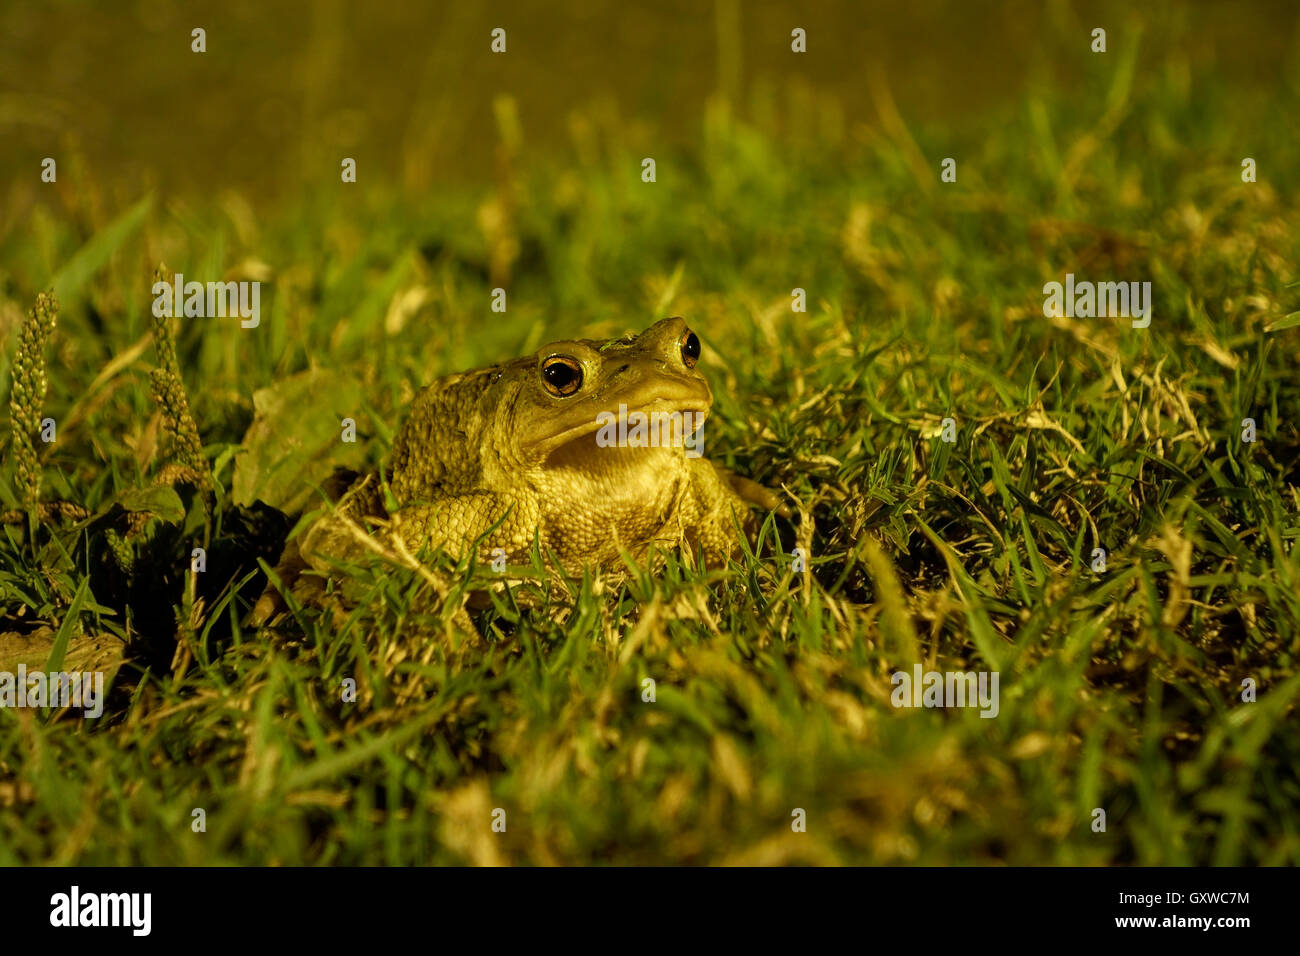 Horizontal portrait of European toad, Bufo bufo, foraging in a garden at night. Stock Photo